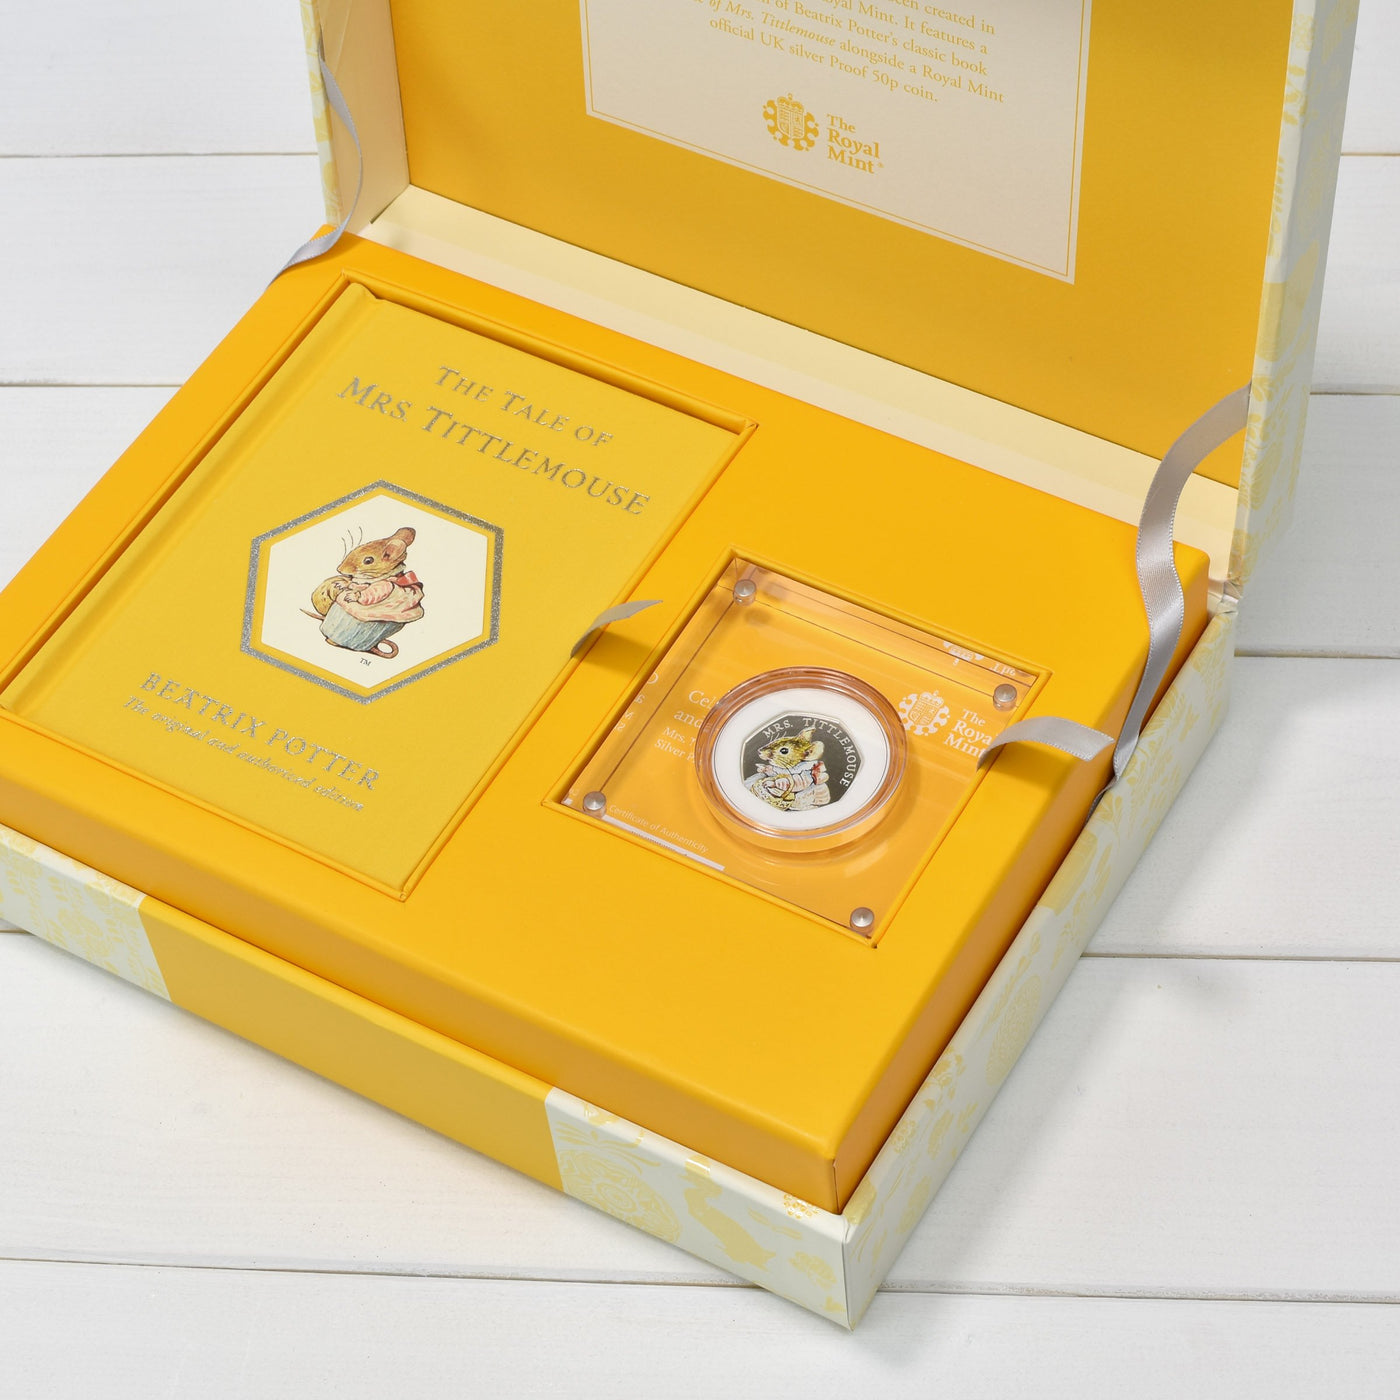 Mrs Tittlemouse Royal Mint Silver Proof Coin & Book Set - Shop Personalised Gifts